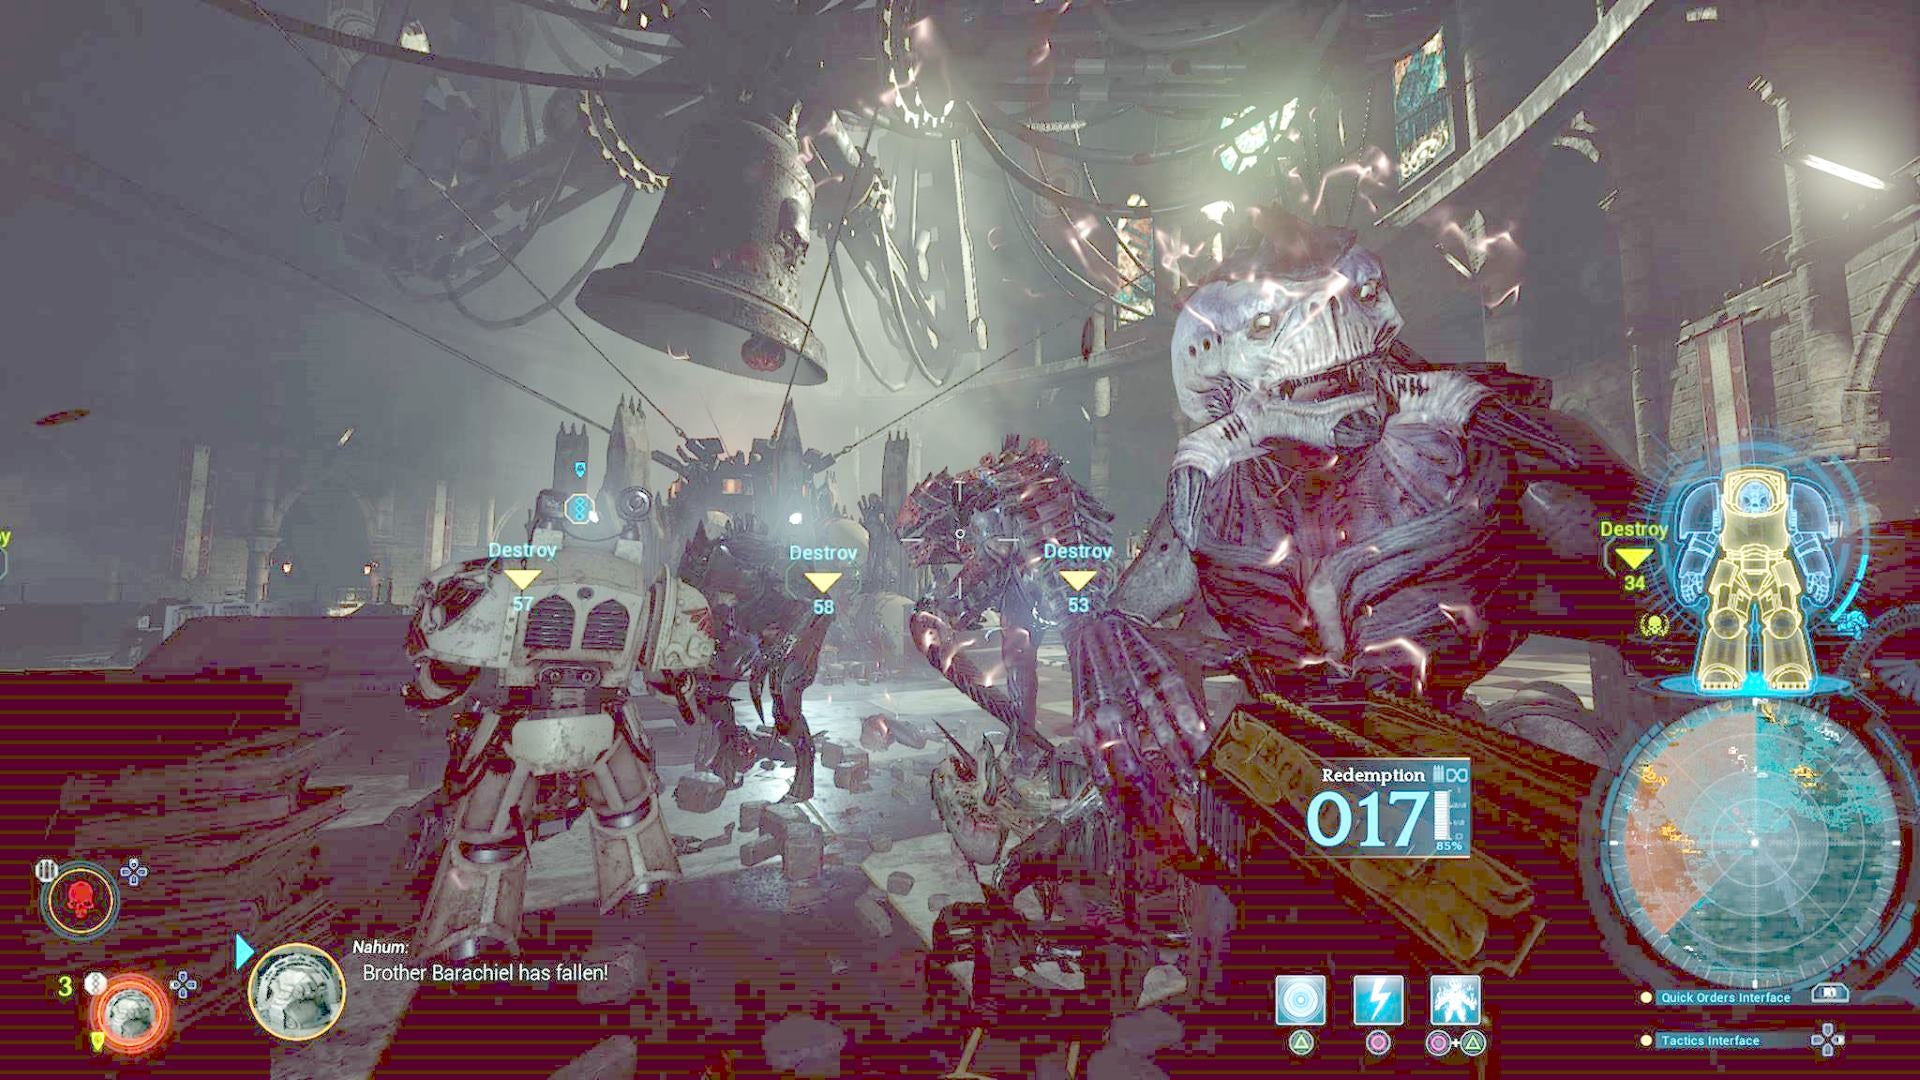 Screenshot from 'Space Hulk: Deathwing' showing in-game battle scene.